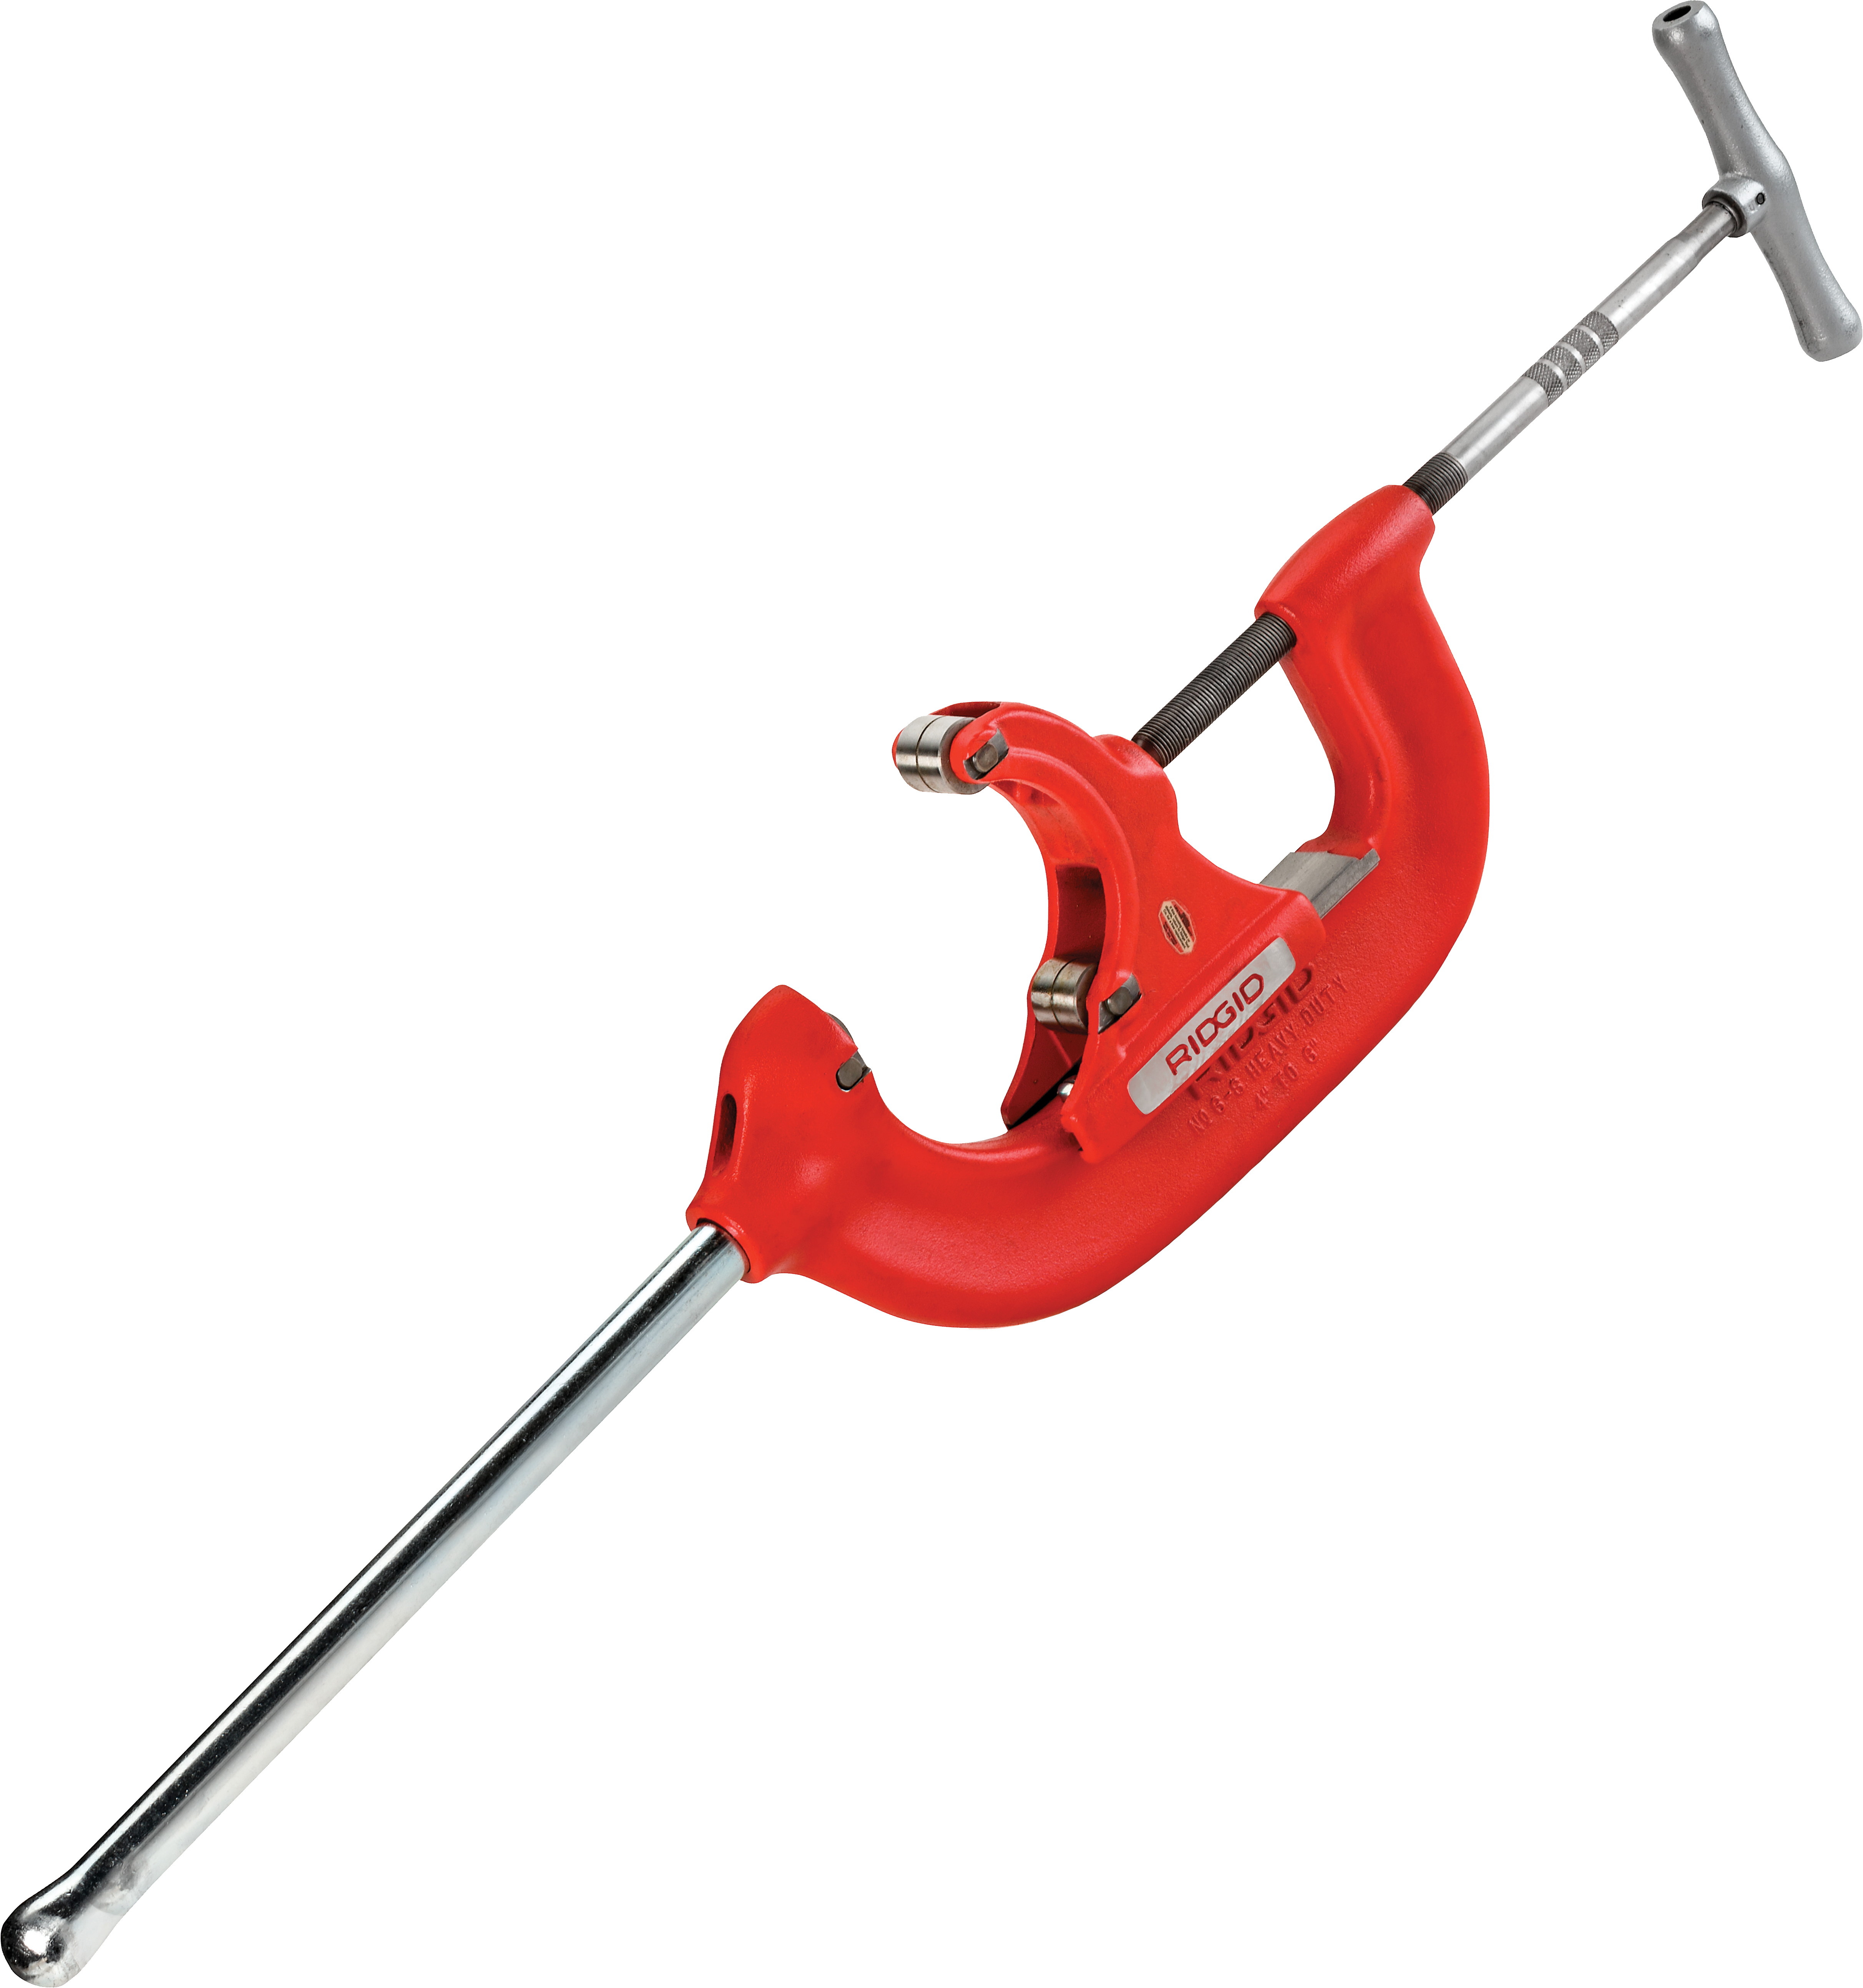 NEW FOOT VISE no PIPE WRENCH 1-1/4-2" RIDGID 300 535 700 1822 122 Pipe Threader 